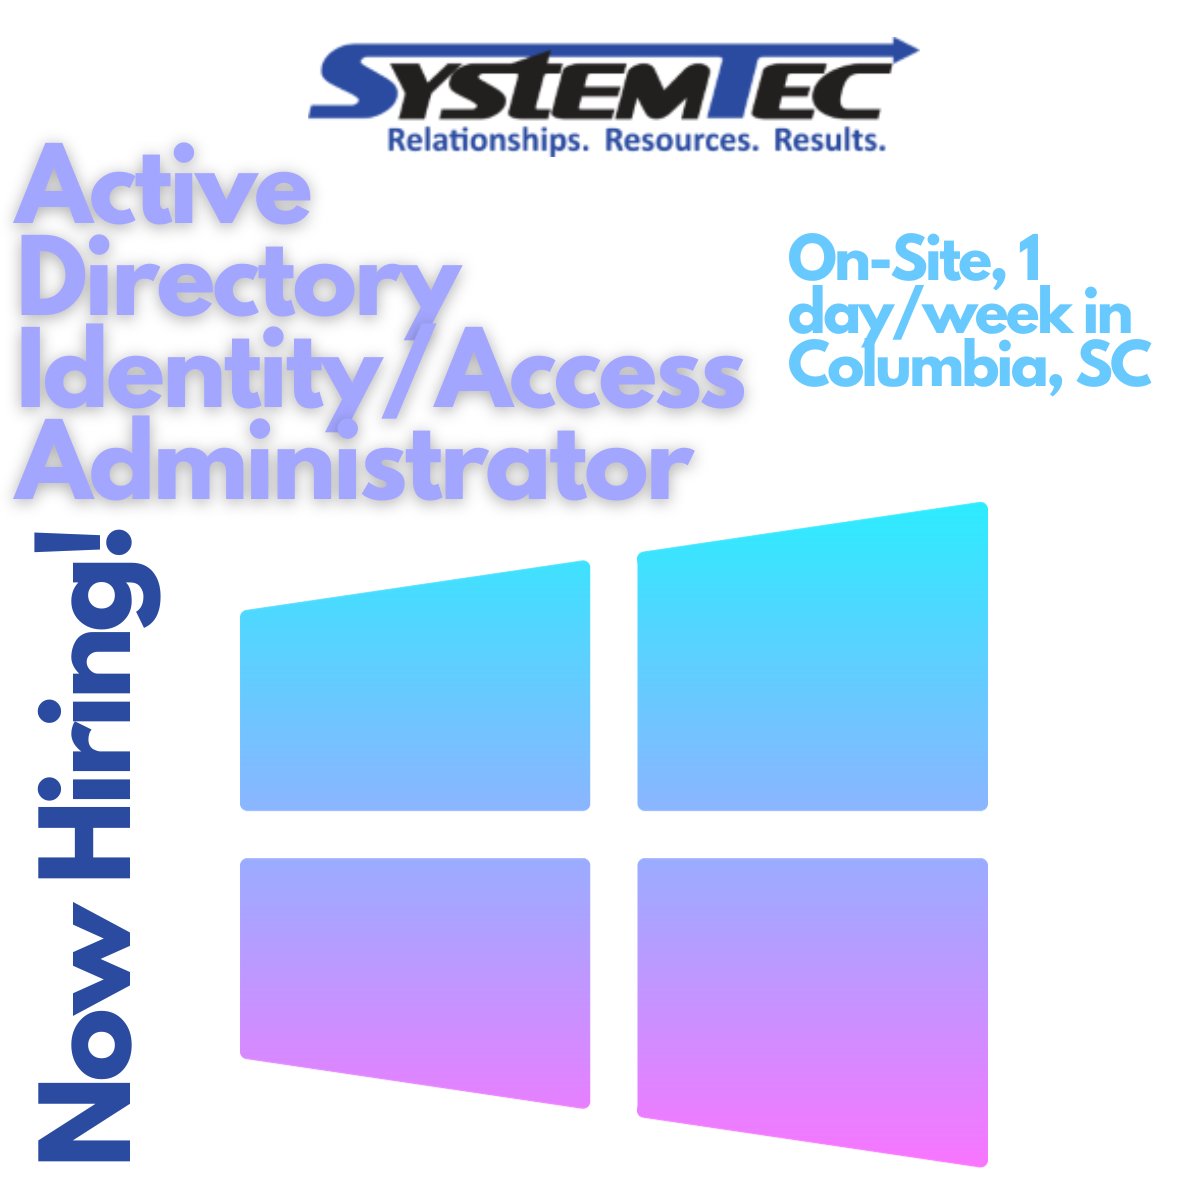 We have a great opportunity for an Active Directory Identity/Access Administrator role in Columbia, SC (1 day a week on-site)! Learn more and apply today! systemtec.net/available-posi…

#activedirectory #identityaccess #itjobs #hiringnow #columbiasc #scjobs #southcarolinajobs